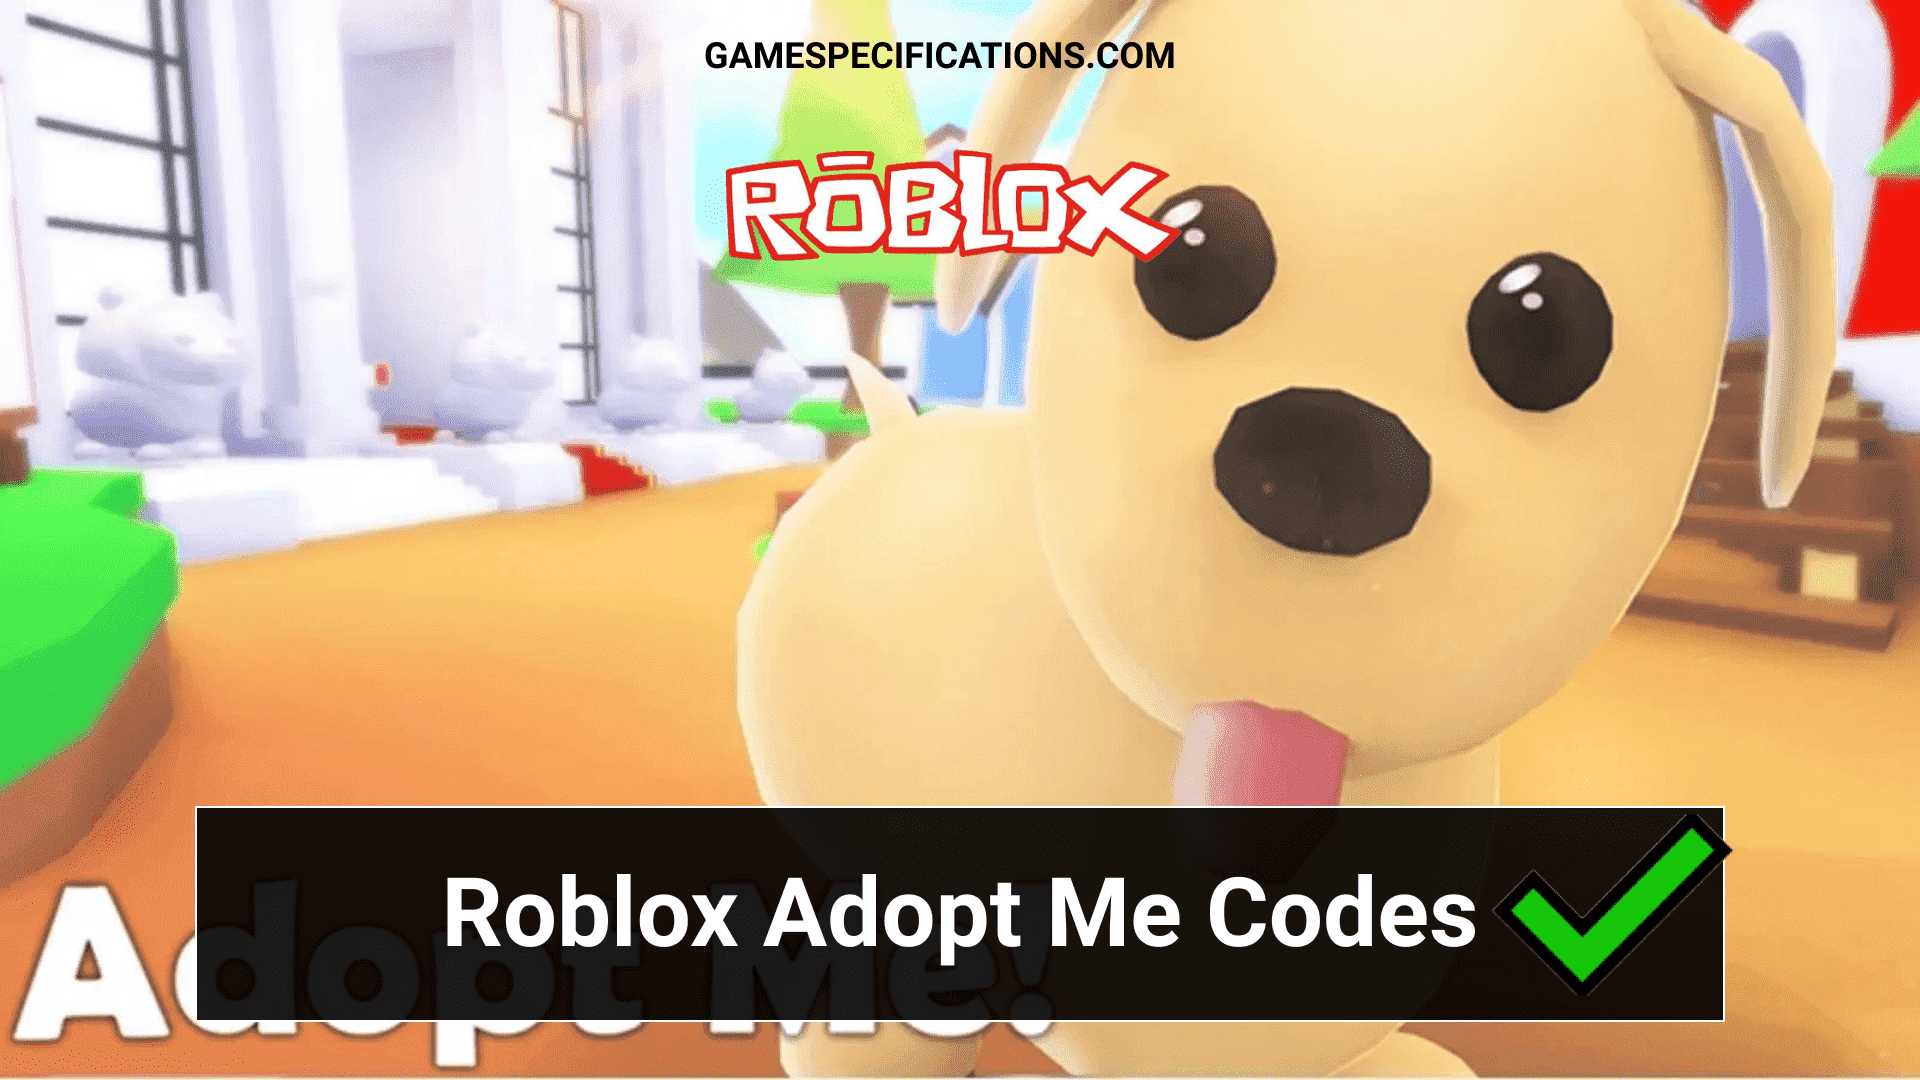 Roblox Adopt Me Codes [August 2022] - Game Specifications